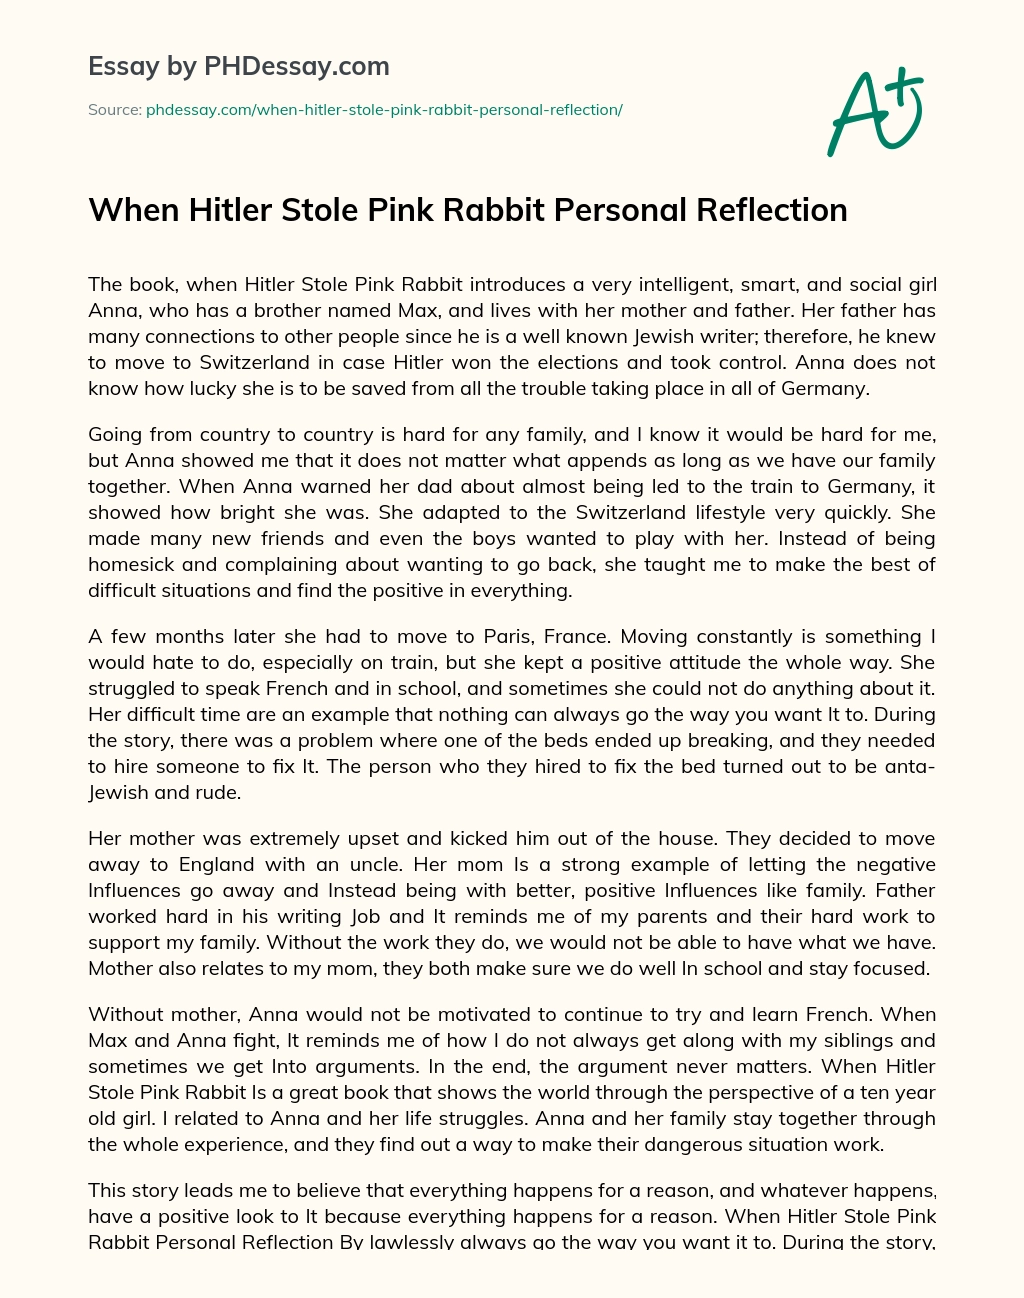 When Hitler Stole Pink Rabbit Personal Reflection essay